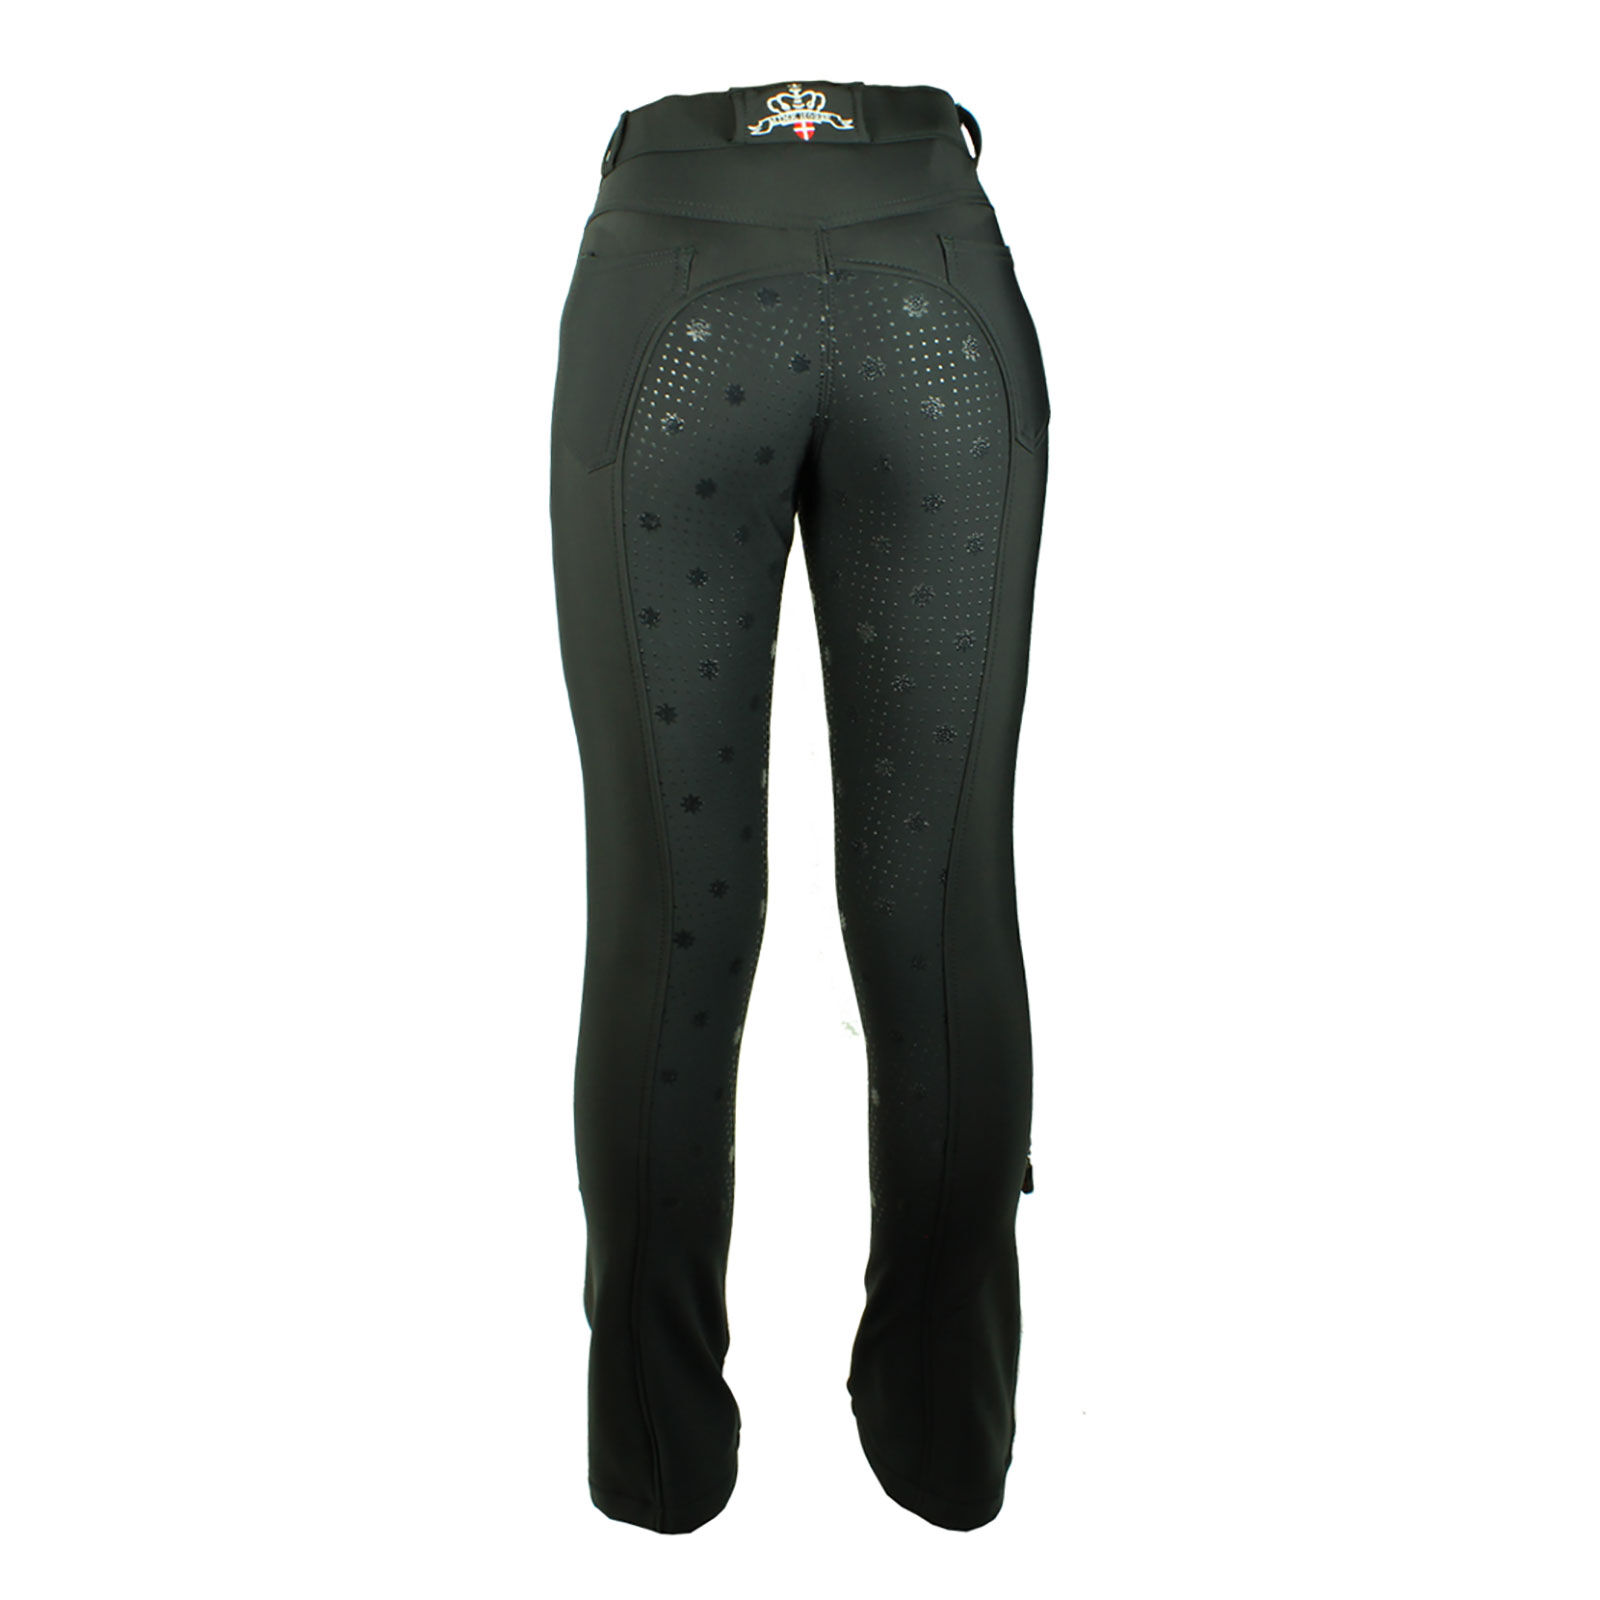 Horze Queenie Full Seat Breech - FREE with purchase of $ 200 or more! -  Equus Now!